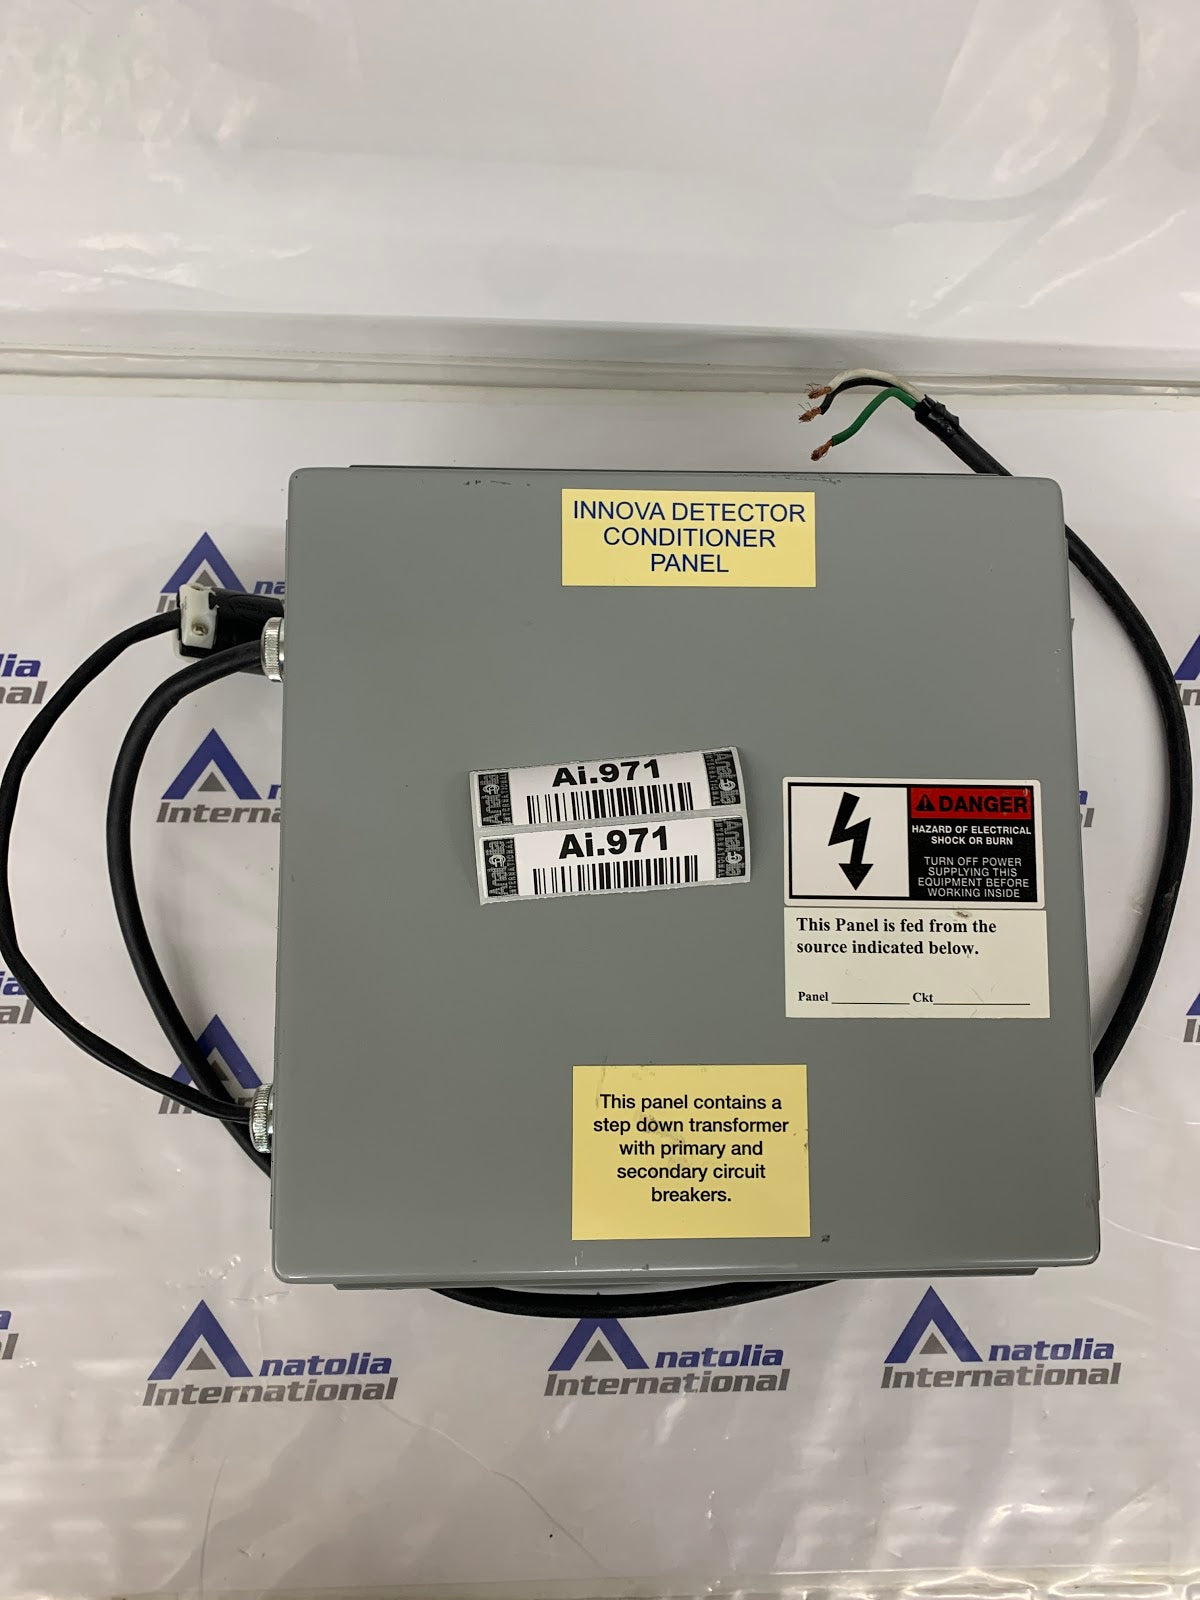 GE SUPPLY C0. MILWAUKEE, Wisconsin, USA GESINNOVADETK1 Innova Detector Conditioner Panel Short Circuit Current Rating: 14,000 Amp RMS Symmetrical @ 480Volts NEAD: 13T-KO050 Serial Number: 6086-3 For GEINNOVA P/N:NEAD: 137T-KO050. Pulled from functioning Equipment, contact for more info.